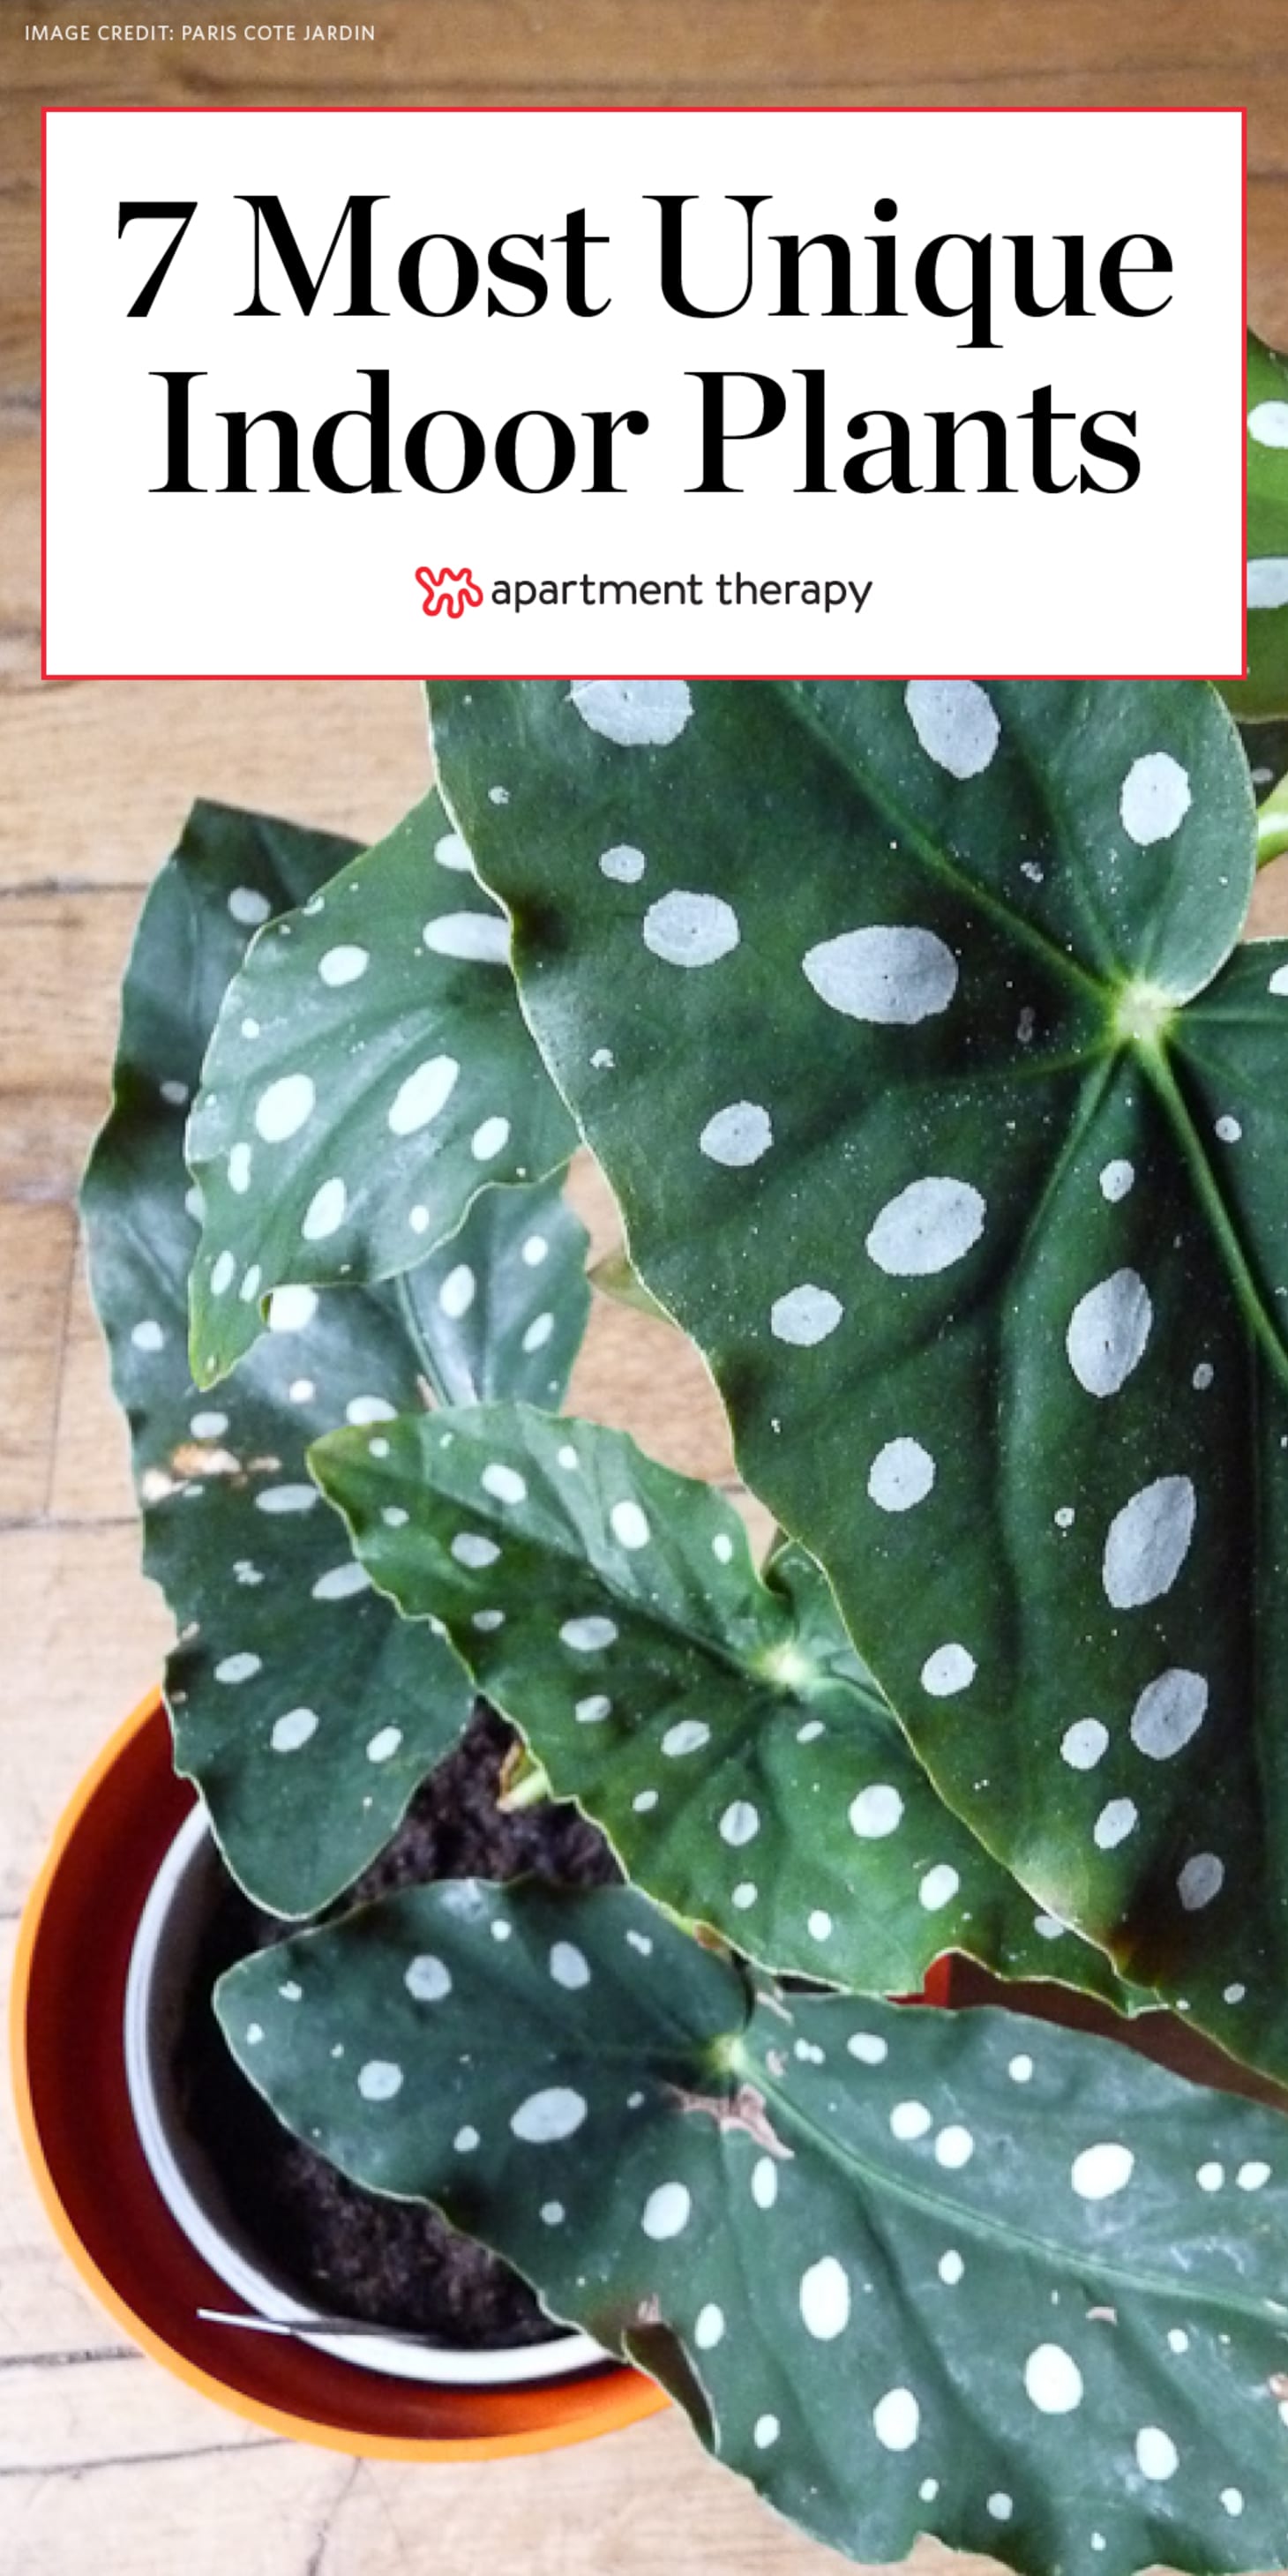 Foliage Plants - Indoor House Plants | Apartment Therapy